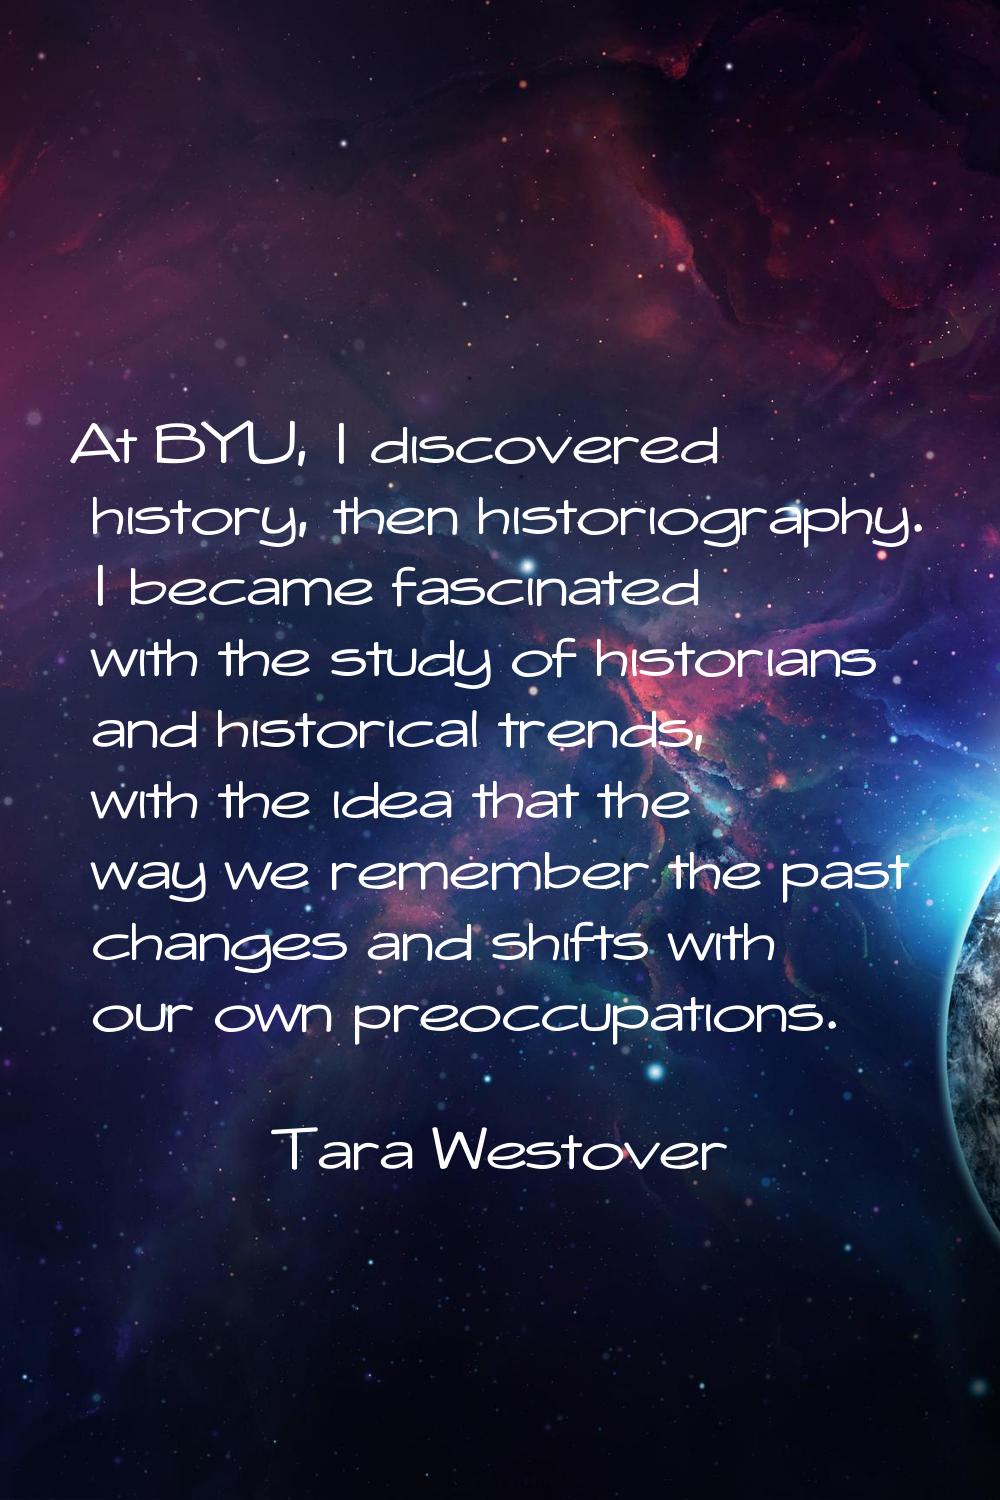 At BYU, I discovered history, then historiography. I became fascinated with the study of historians